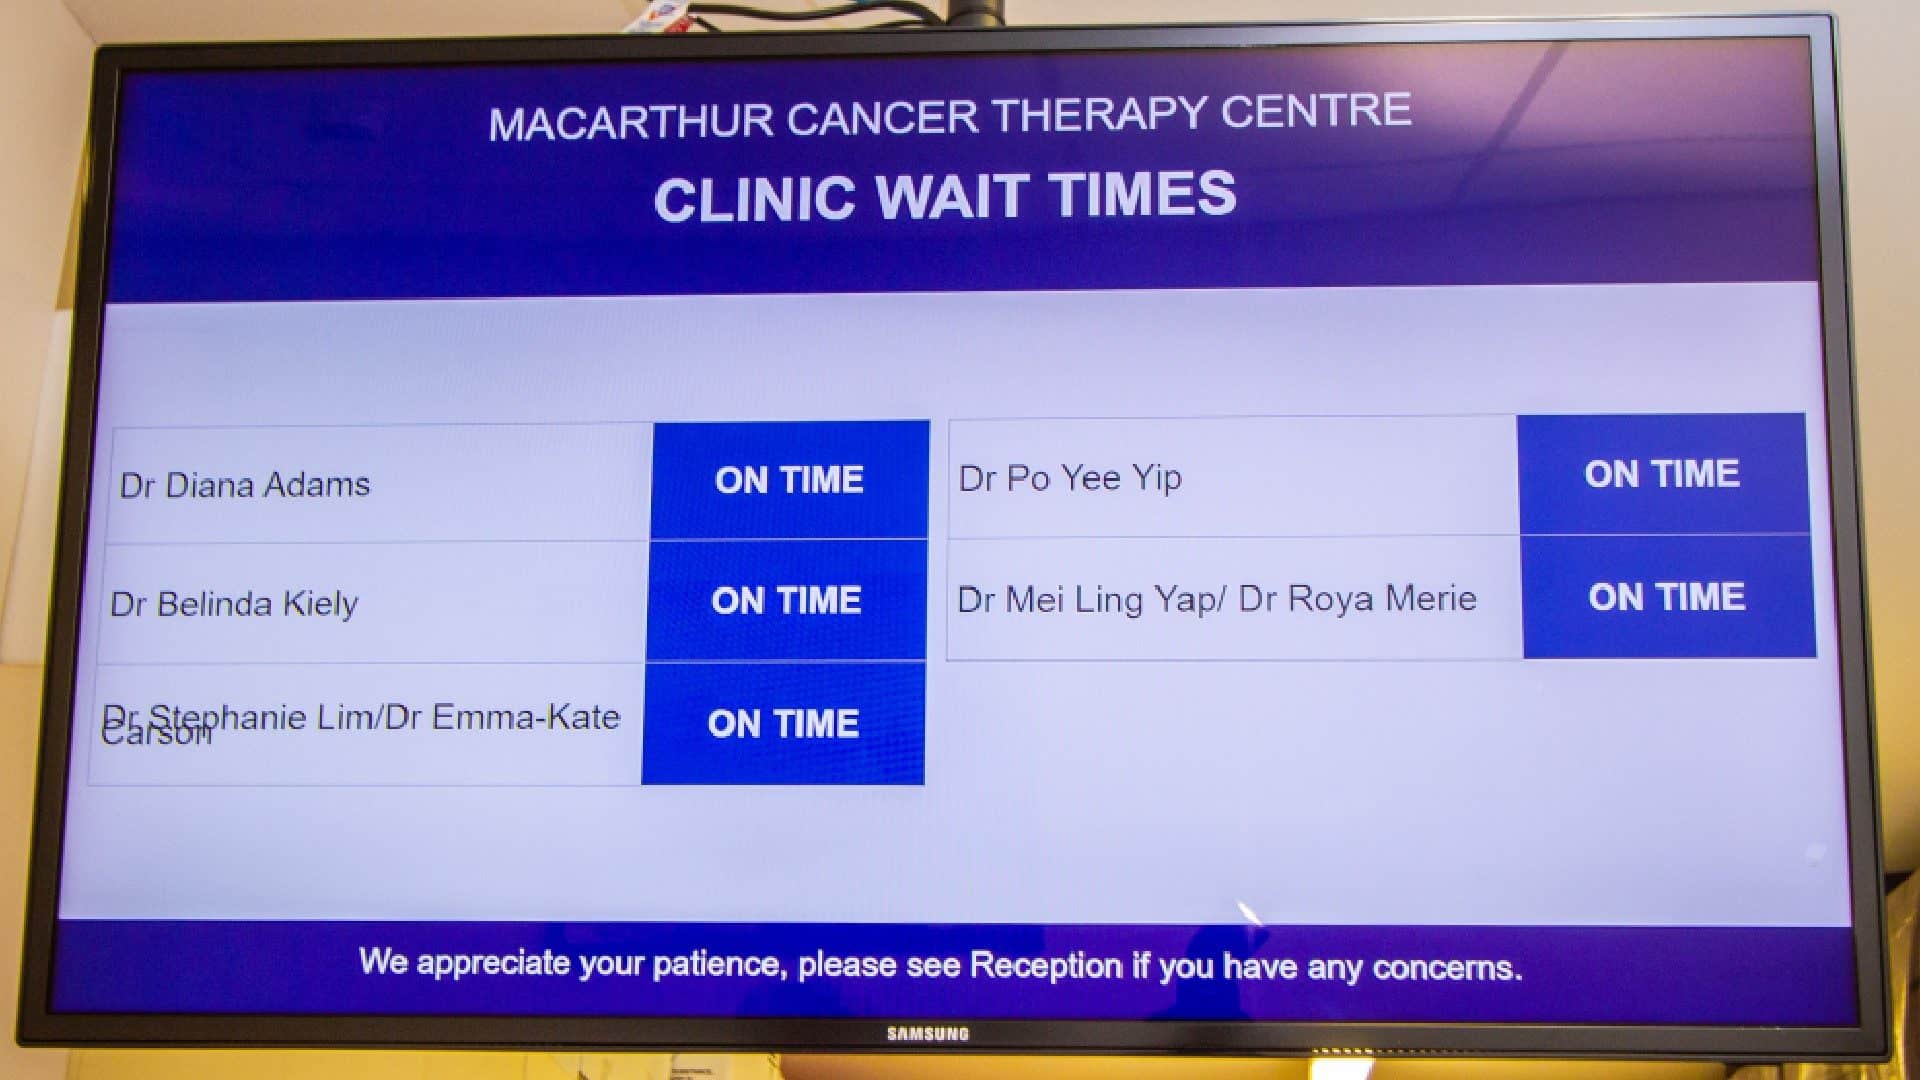 Advertise Me Cancer Therapy Centre Clinic Wait Times header